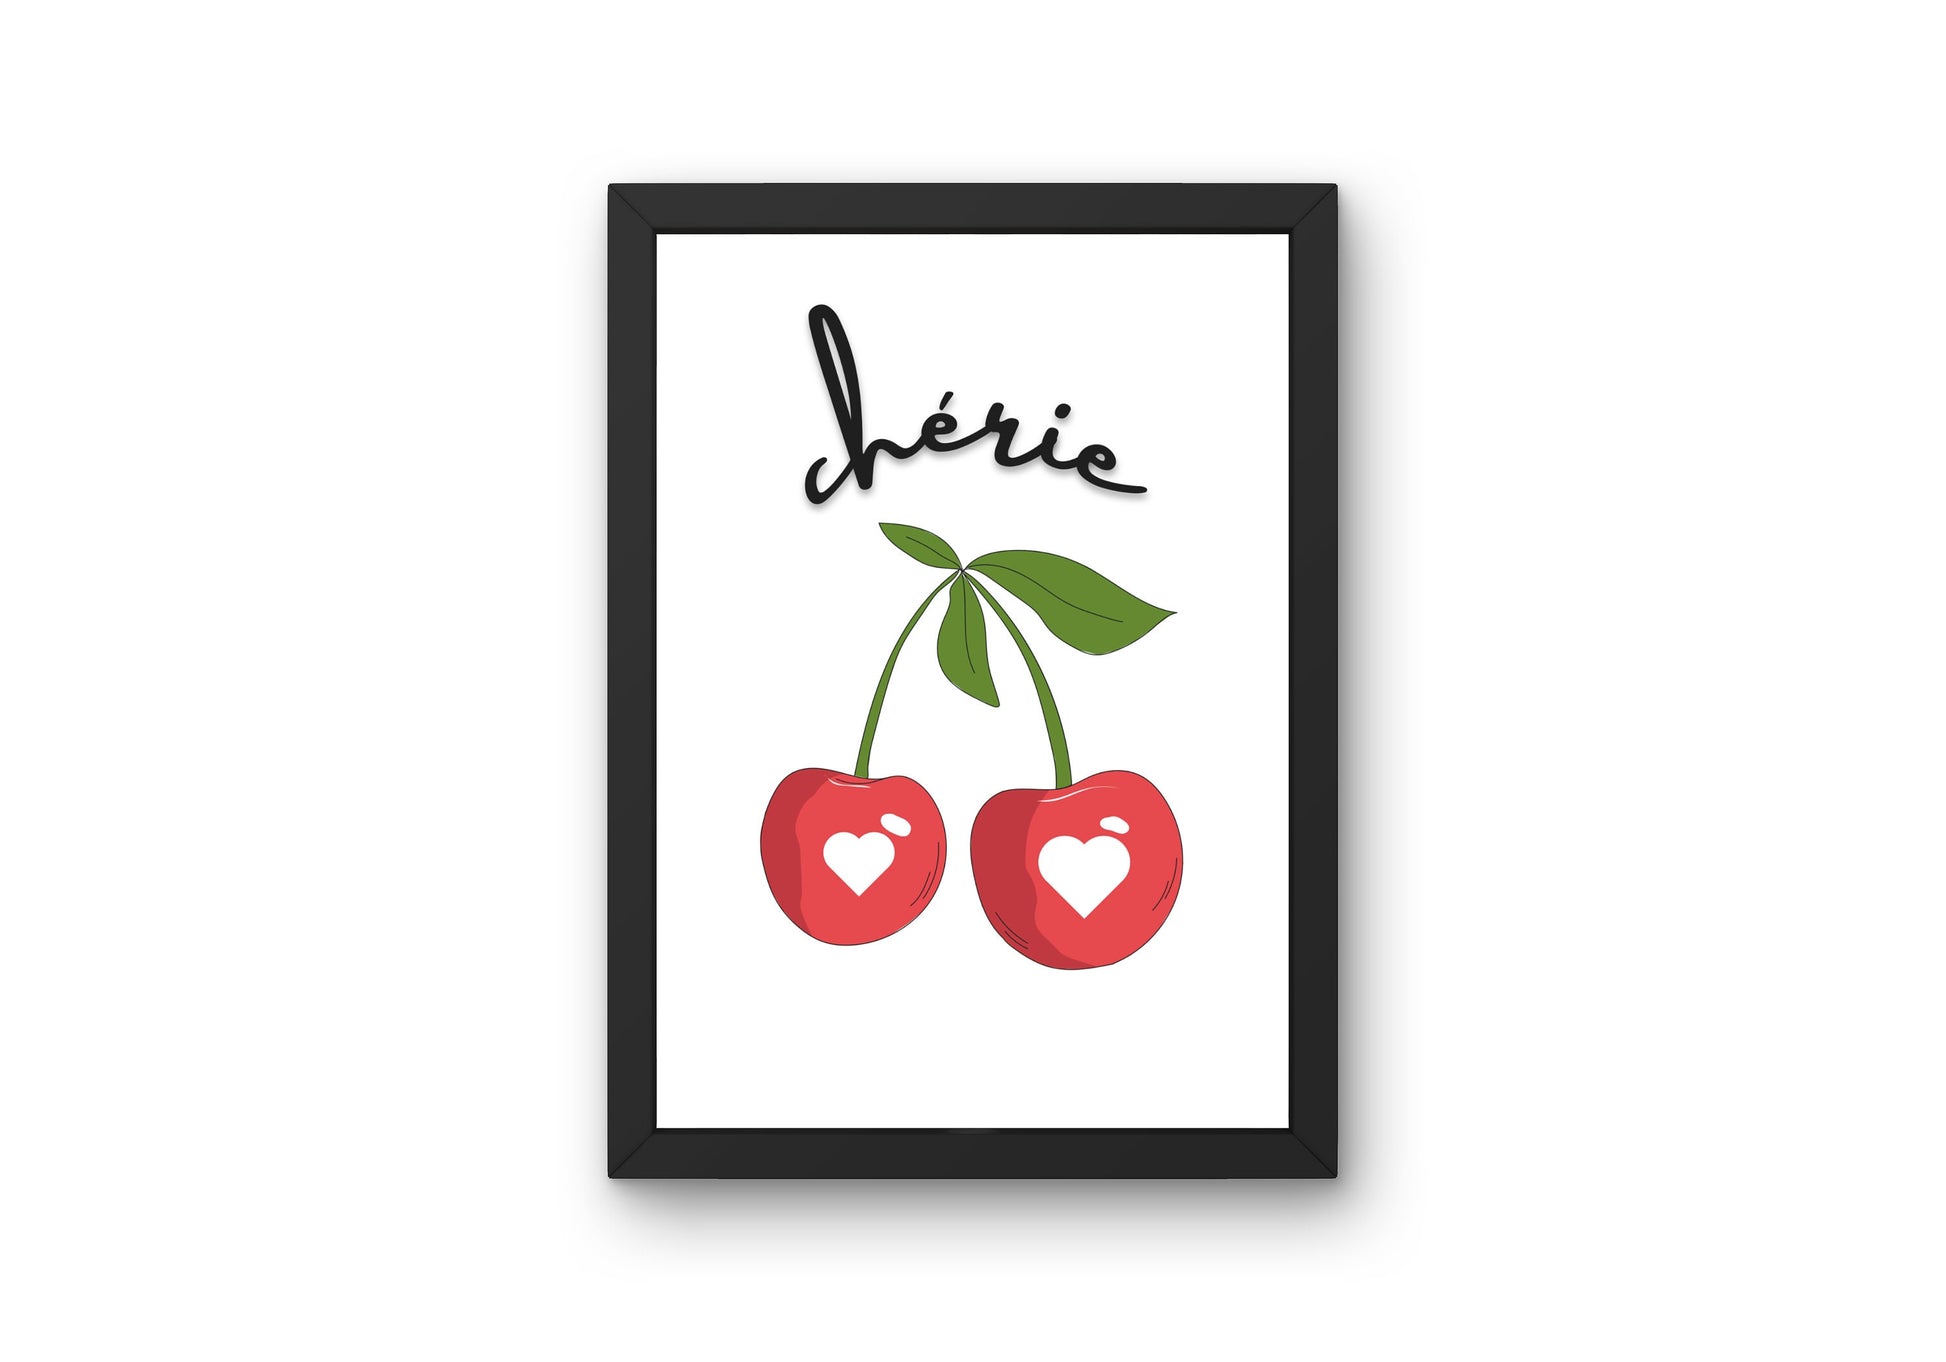 Cherie Cherry Poster INSTANT DOWNLOAD, preppy poster print, funky one piece poster, college dorm poster, fruit poster, Valentine's day Decor